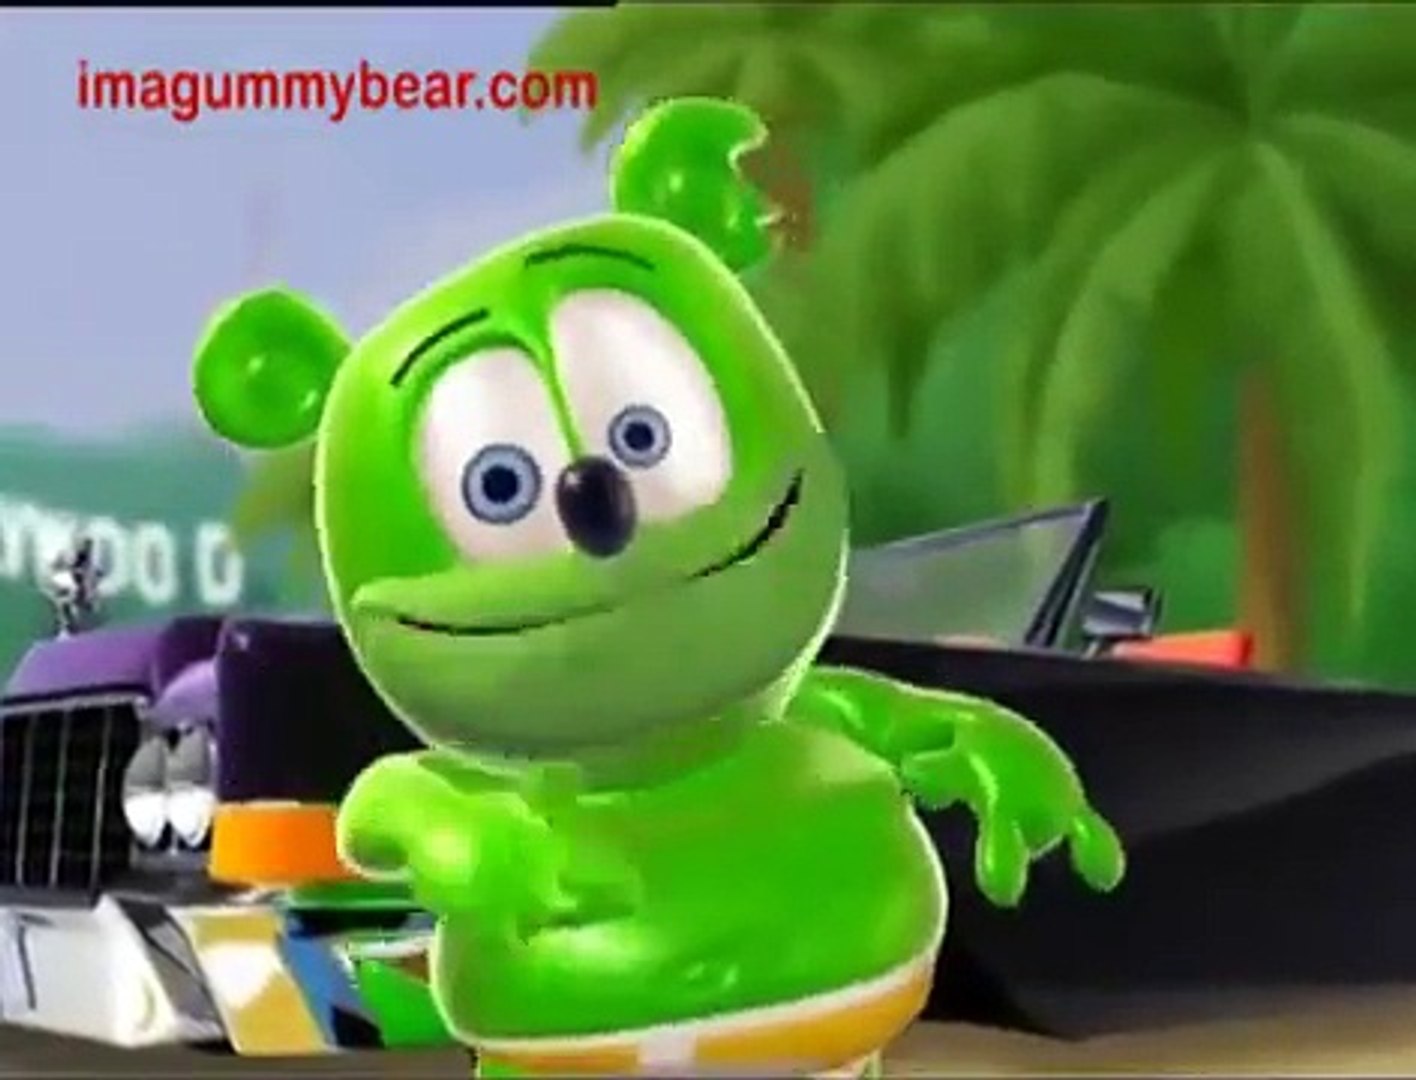 How to watch and stream The Gummy Bear Song - Long English Version -  Gummibar - 2016 on Roku